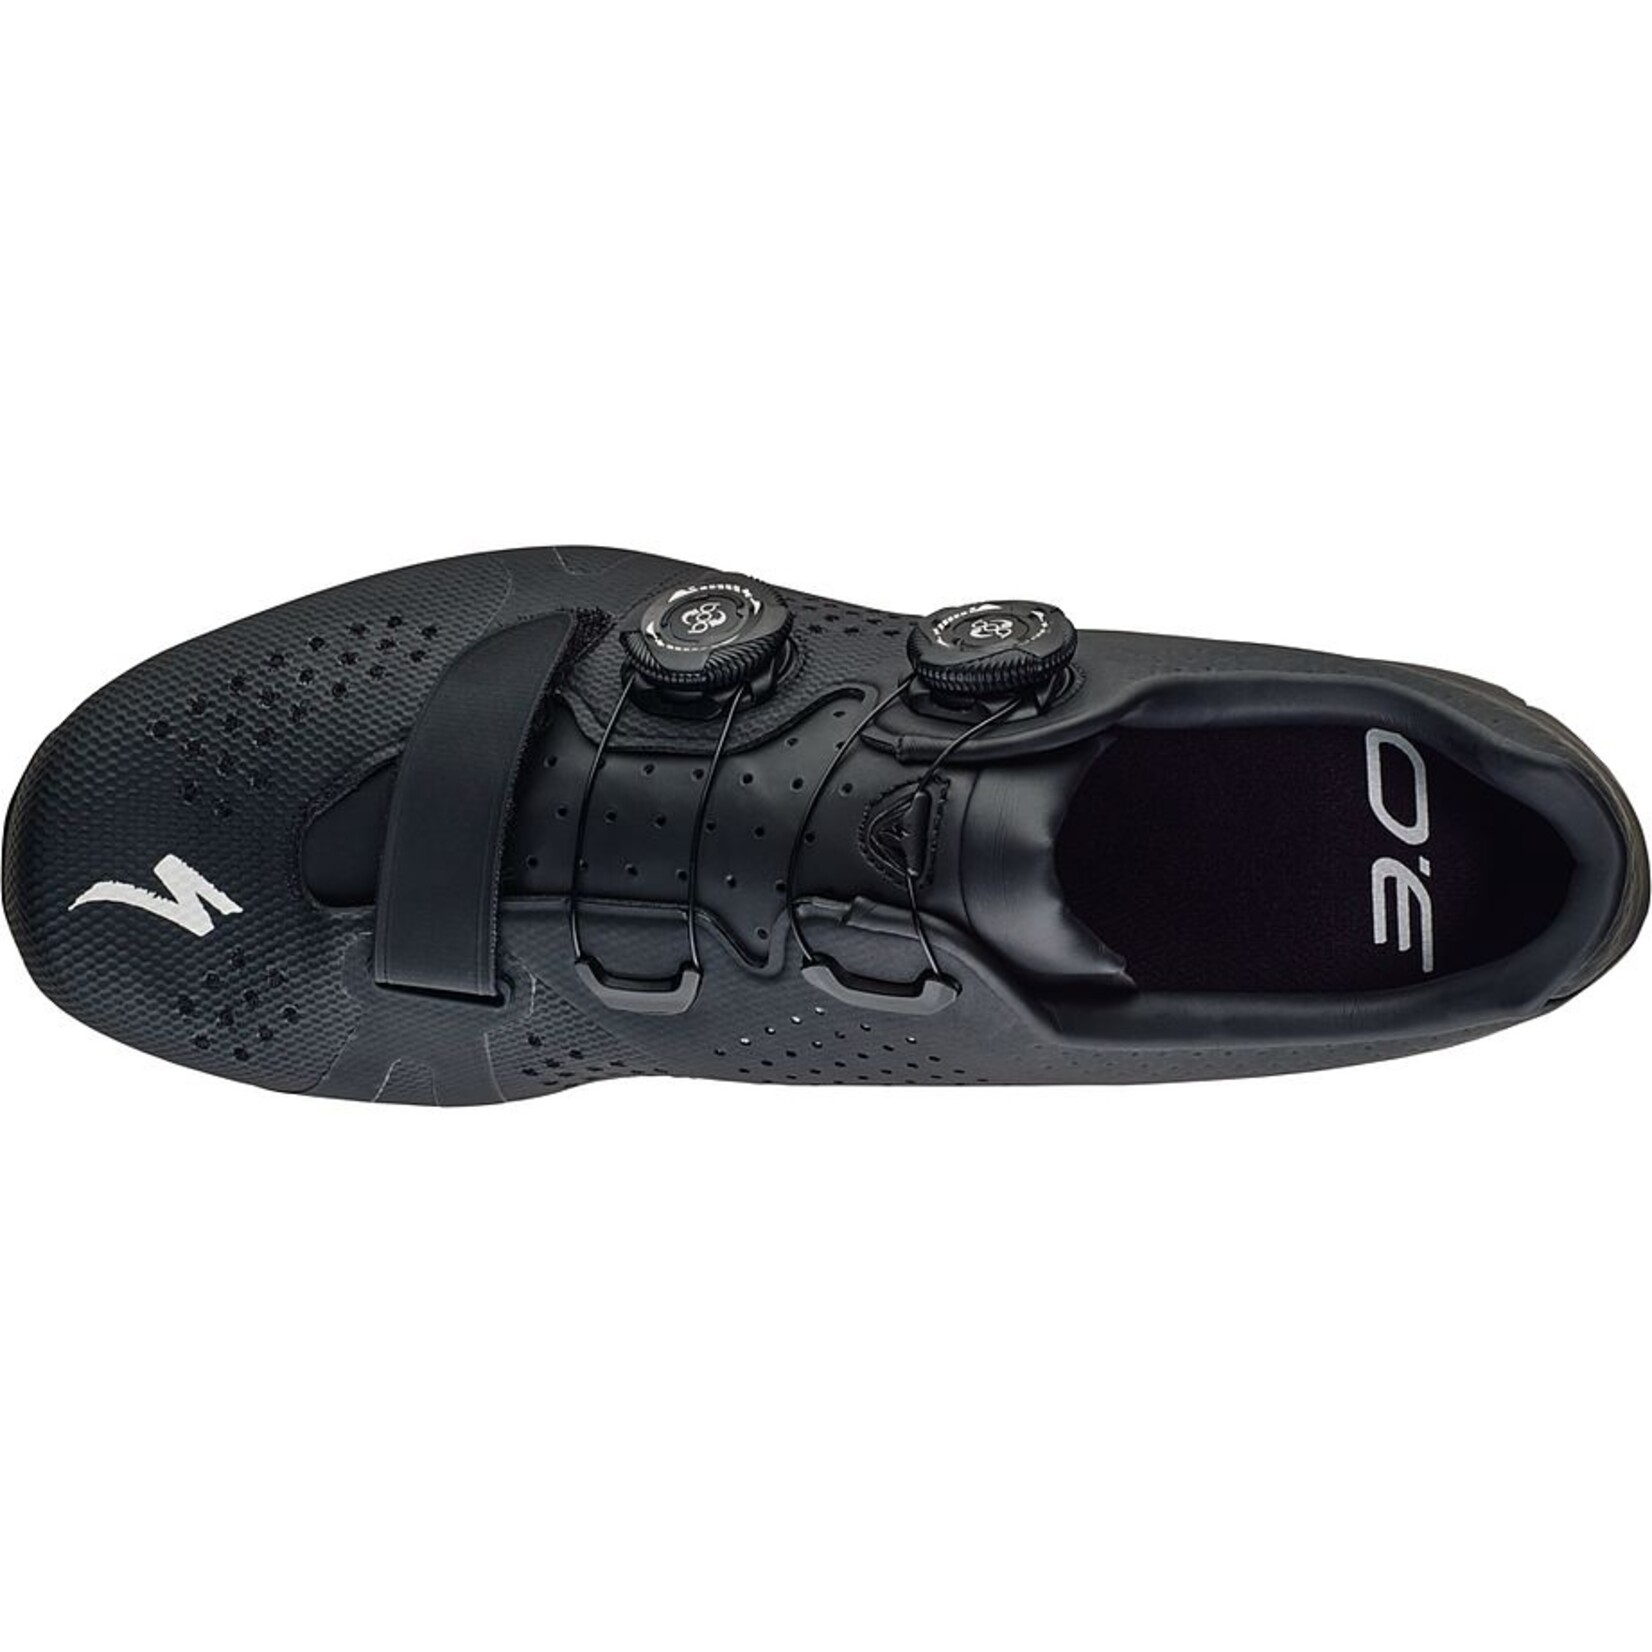 Specialized Torch 3.0 Road Shoes in Black